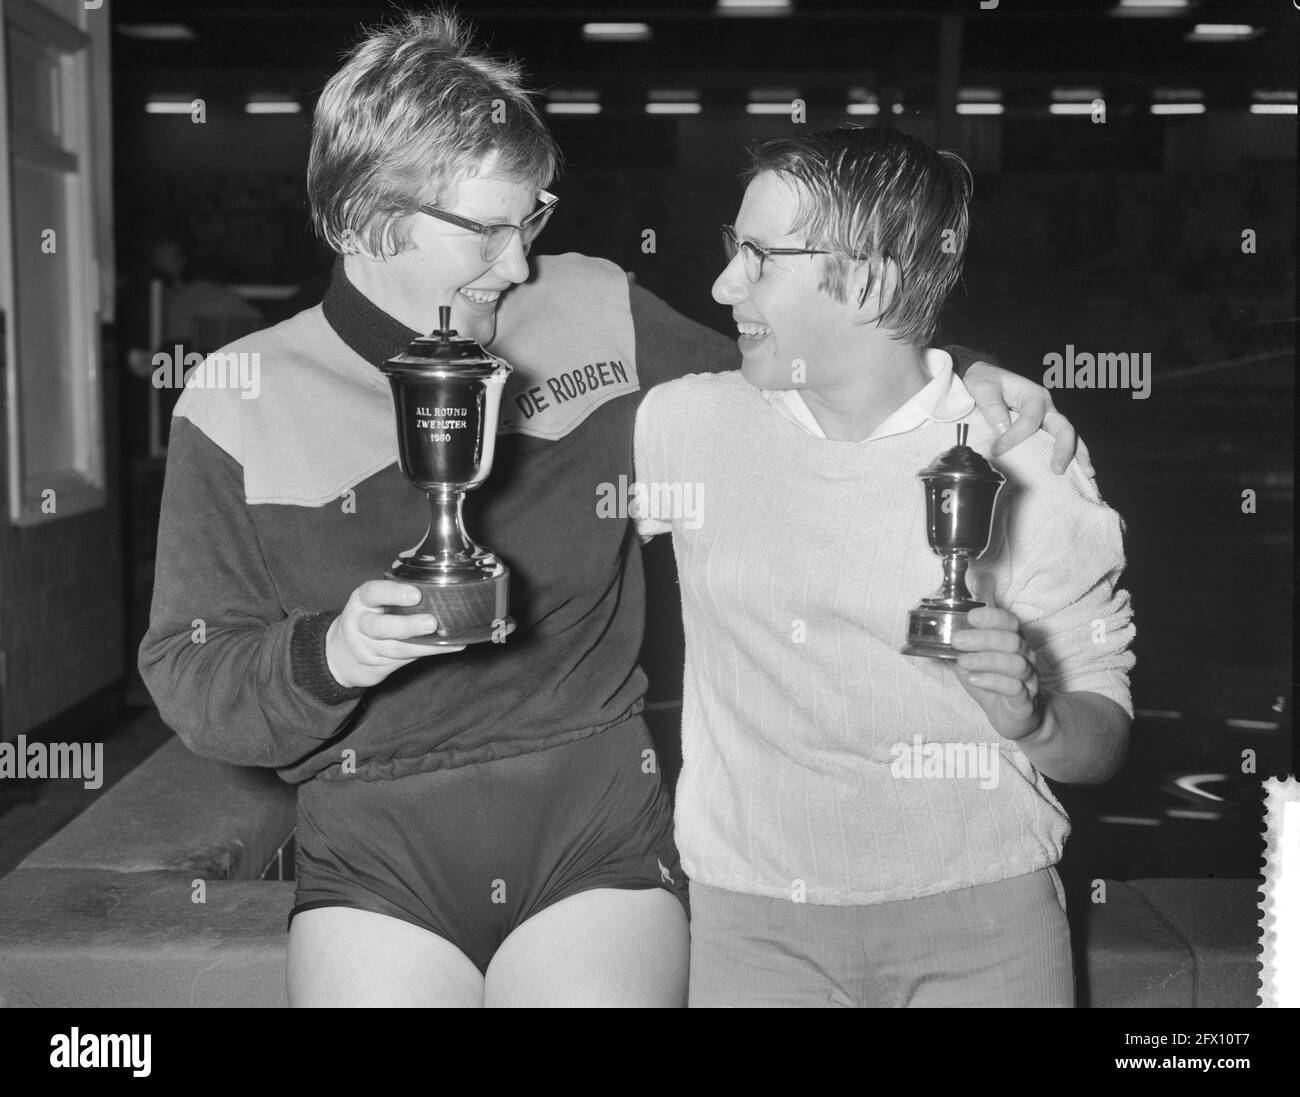 Swimming contests in the Sportfondsenbad Oost for the title All round swimmer, October 15, 1960, SPORTFONDSENBADEN, TITELS, SWIMMING CONDITIONS, The Netherlands, 20th century press agency photo, news to remember, documentary, historic photography 1945-1990, visual stories, human history of the Twentieth Century, capturing moments in time Stock Photo